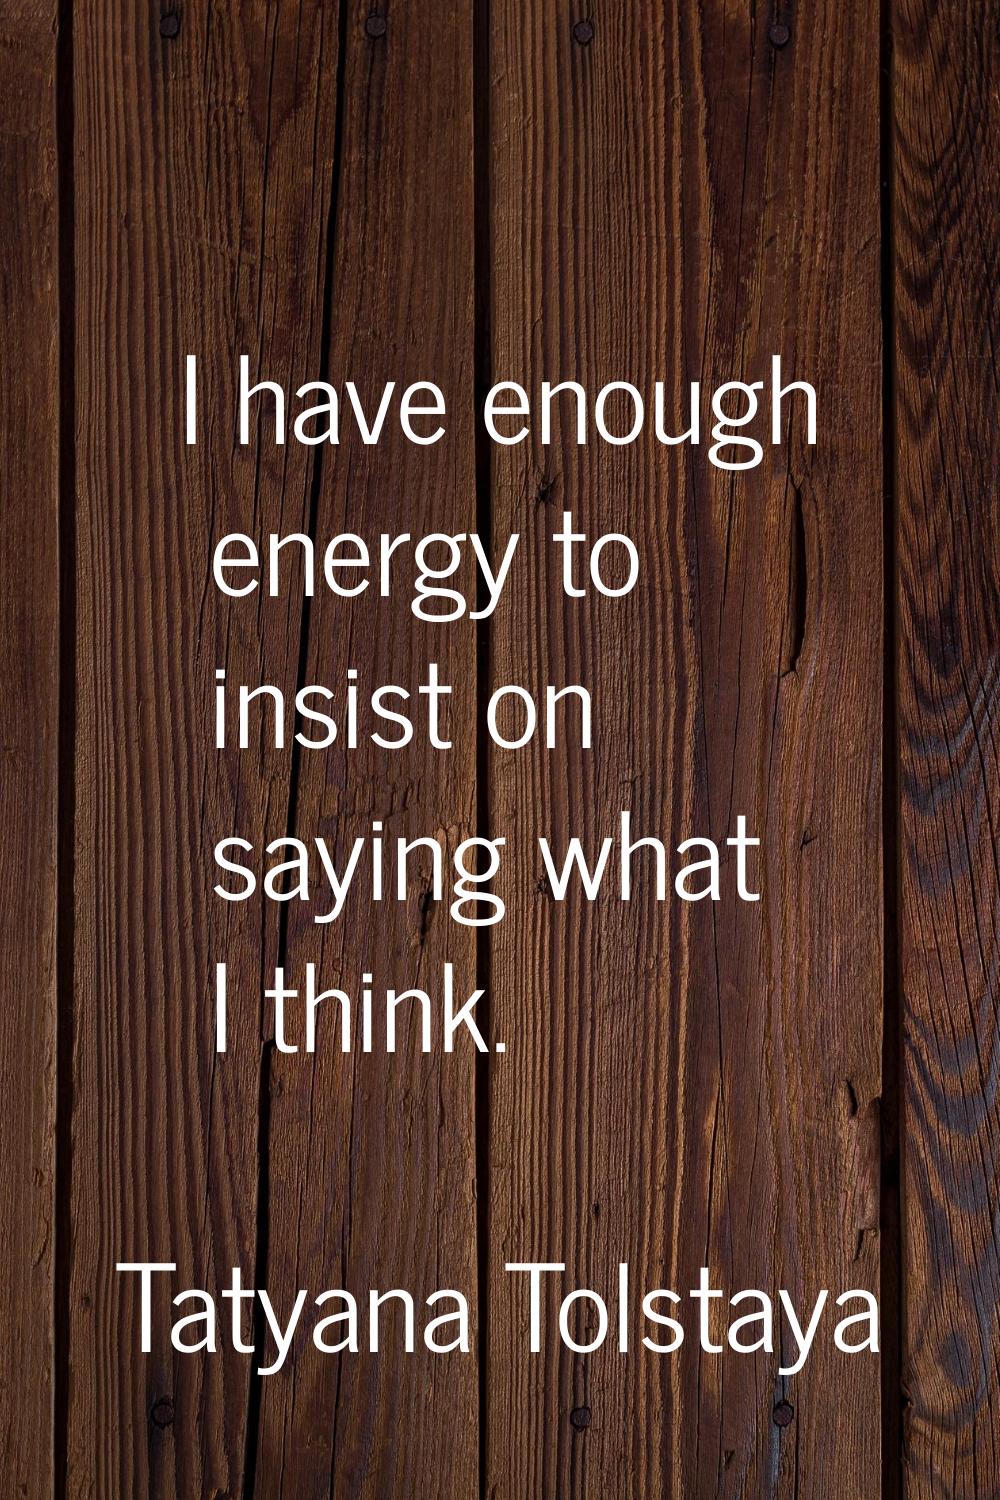 I have enough energy to insist on saying what I think.